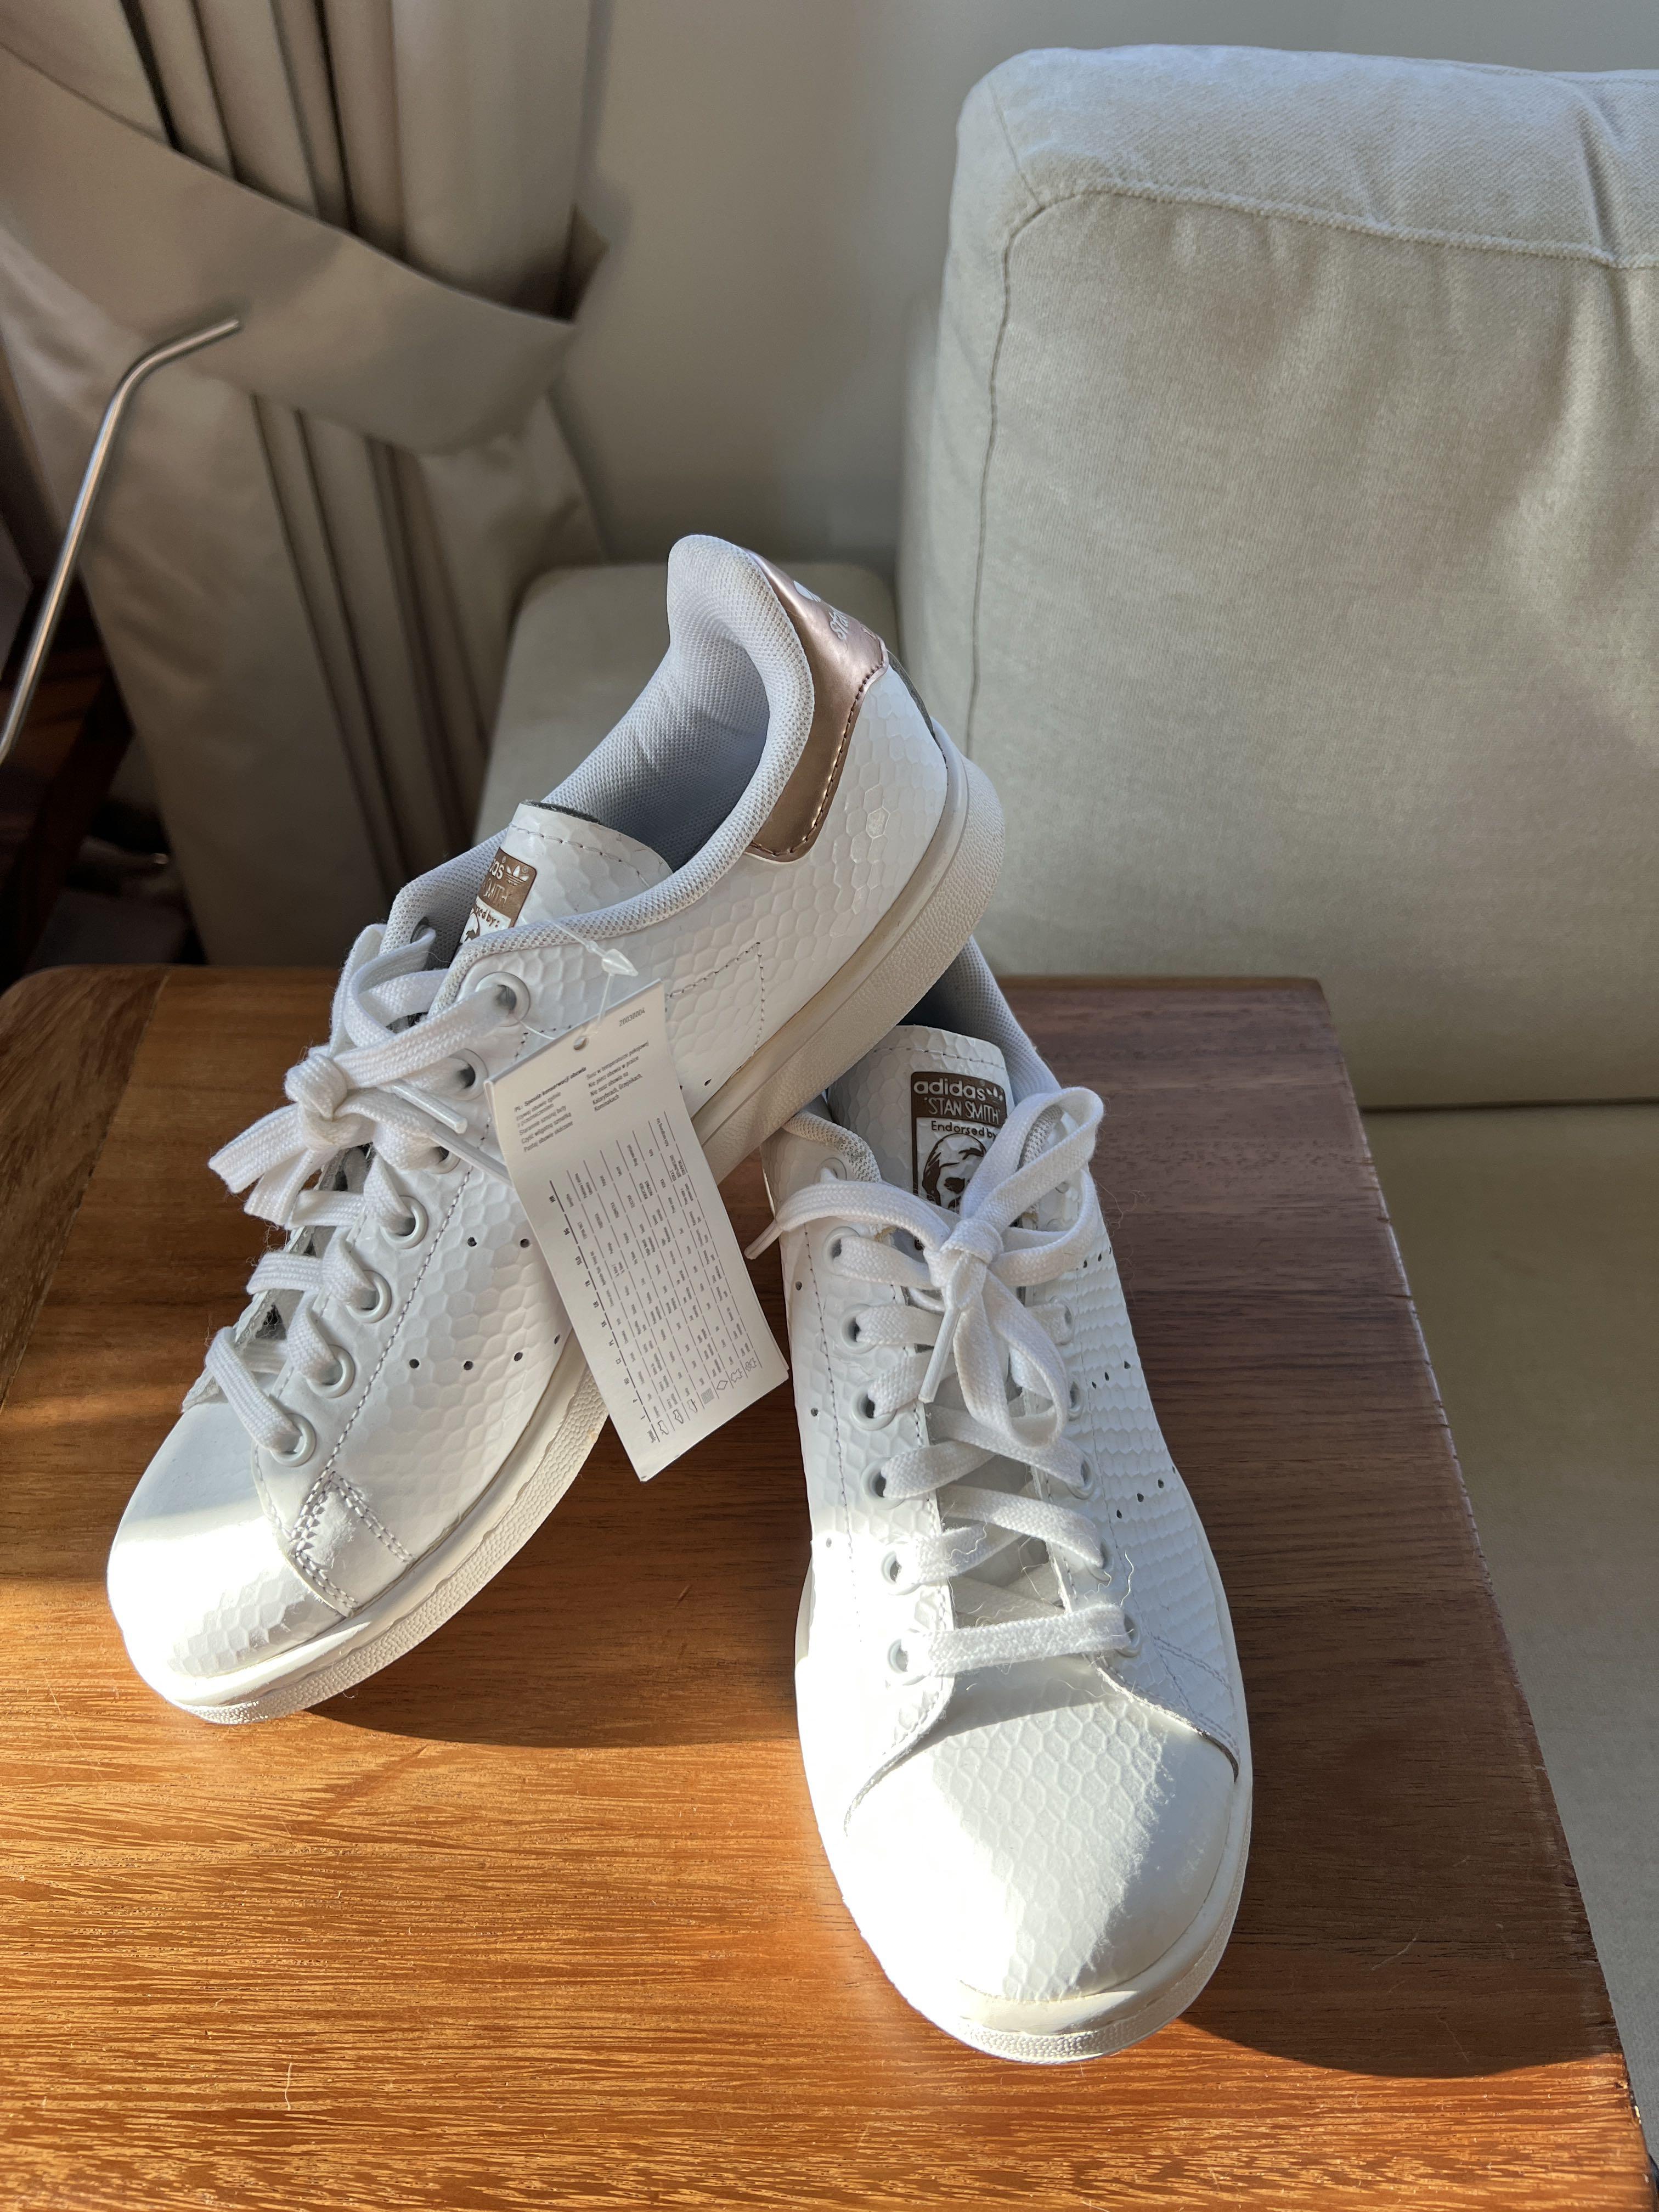 Adidas Stan Smith Rose Gold White Sneakers 7.5, Women's Footwear, Sneakers on Carousell